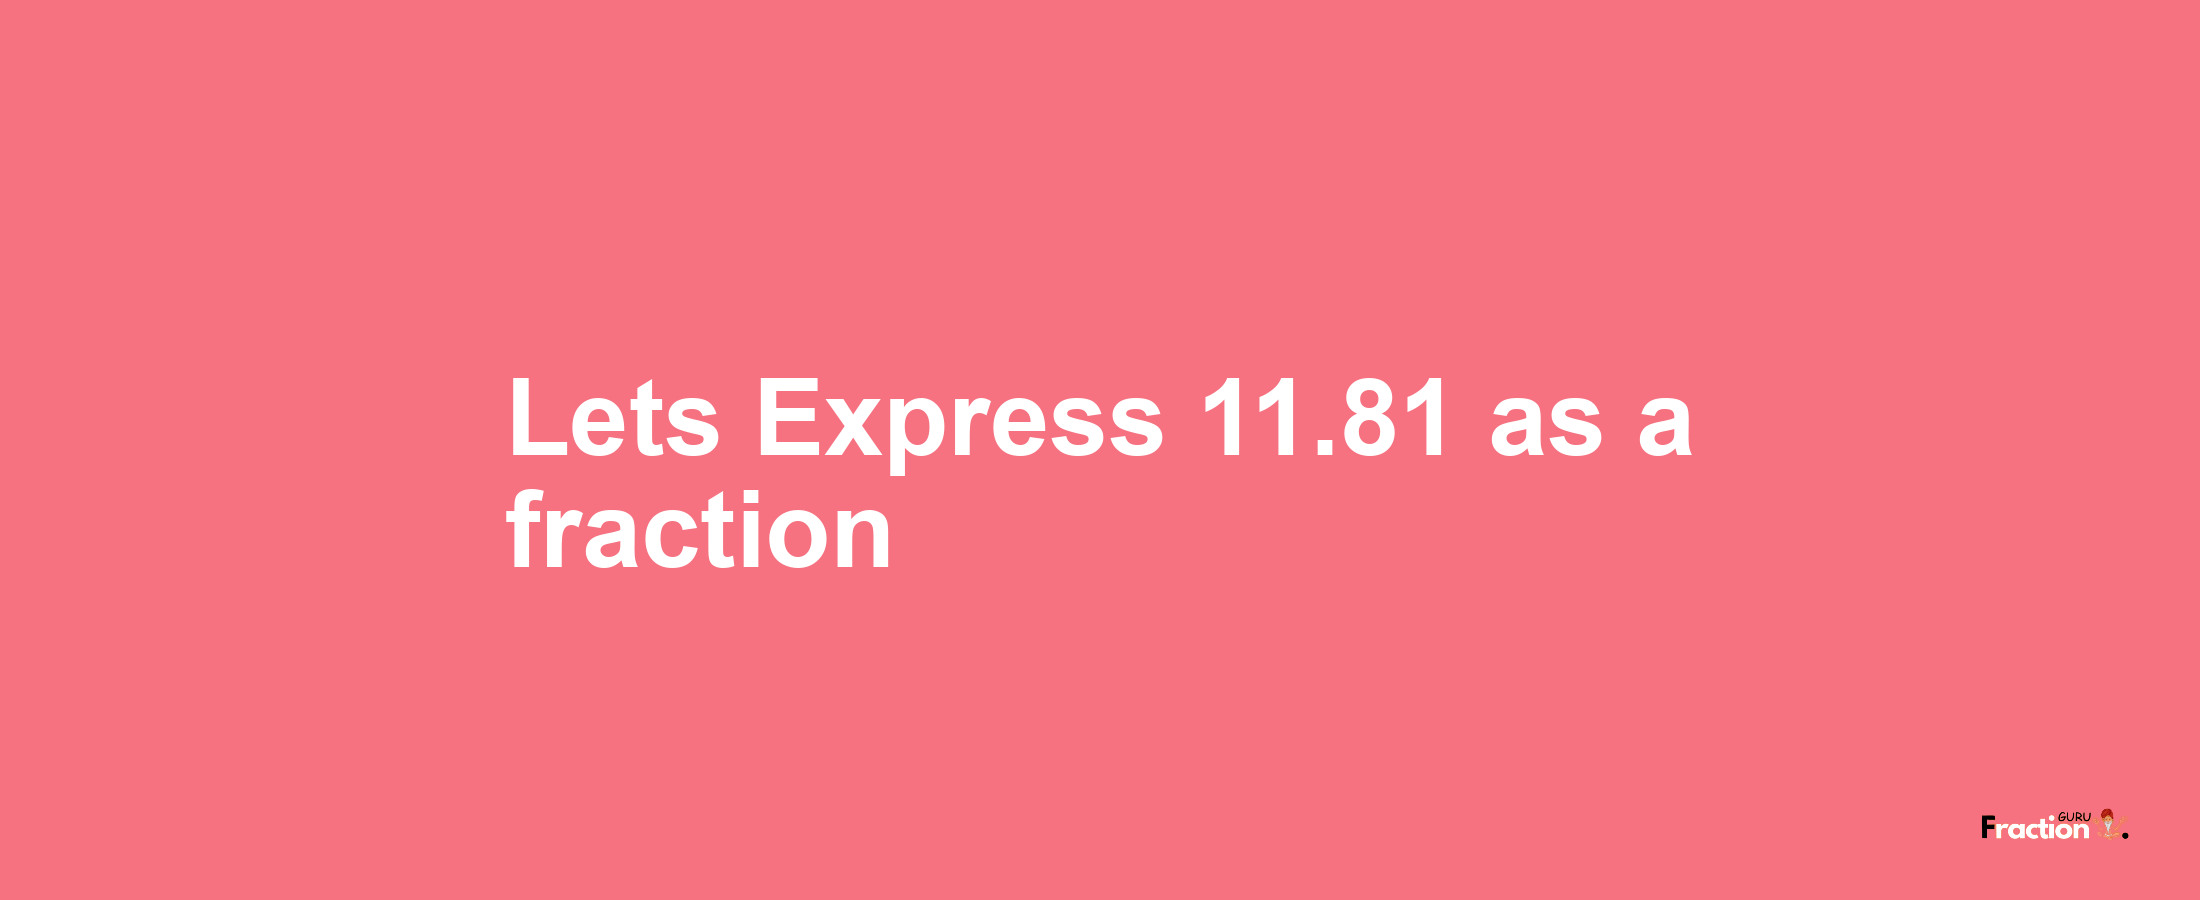 Lets Express 11.81 as afraction